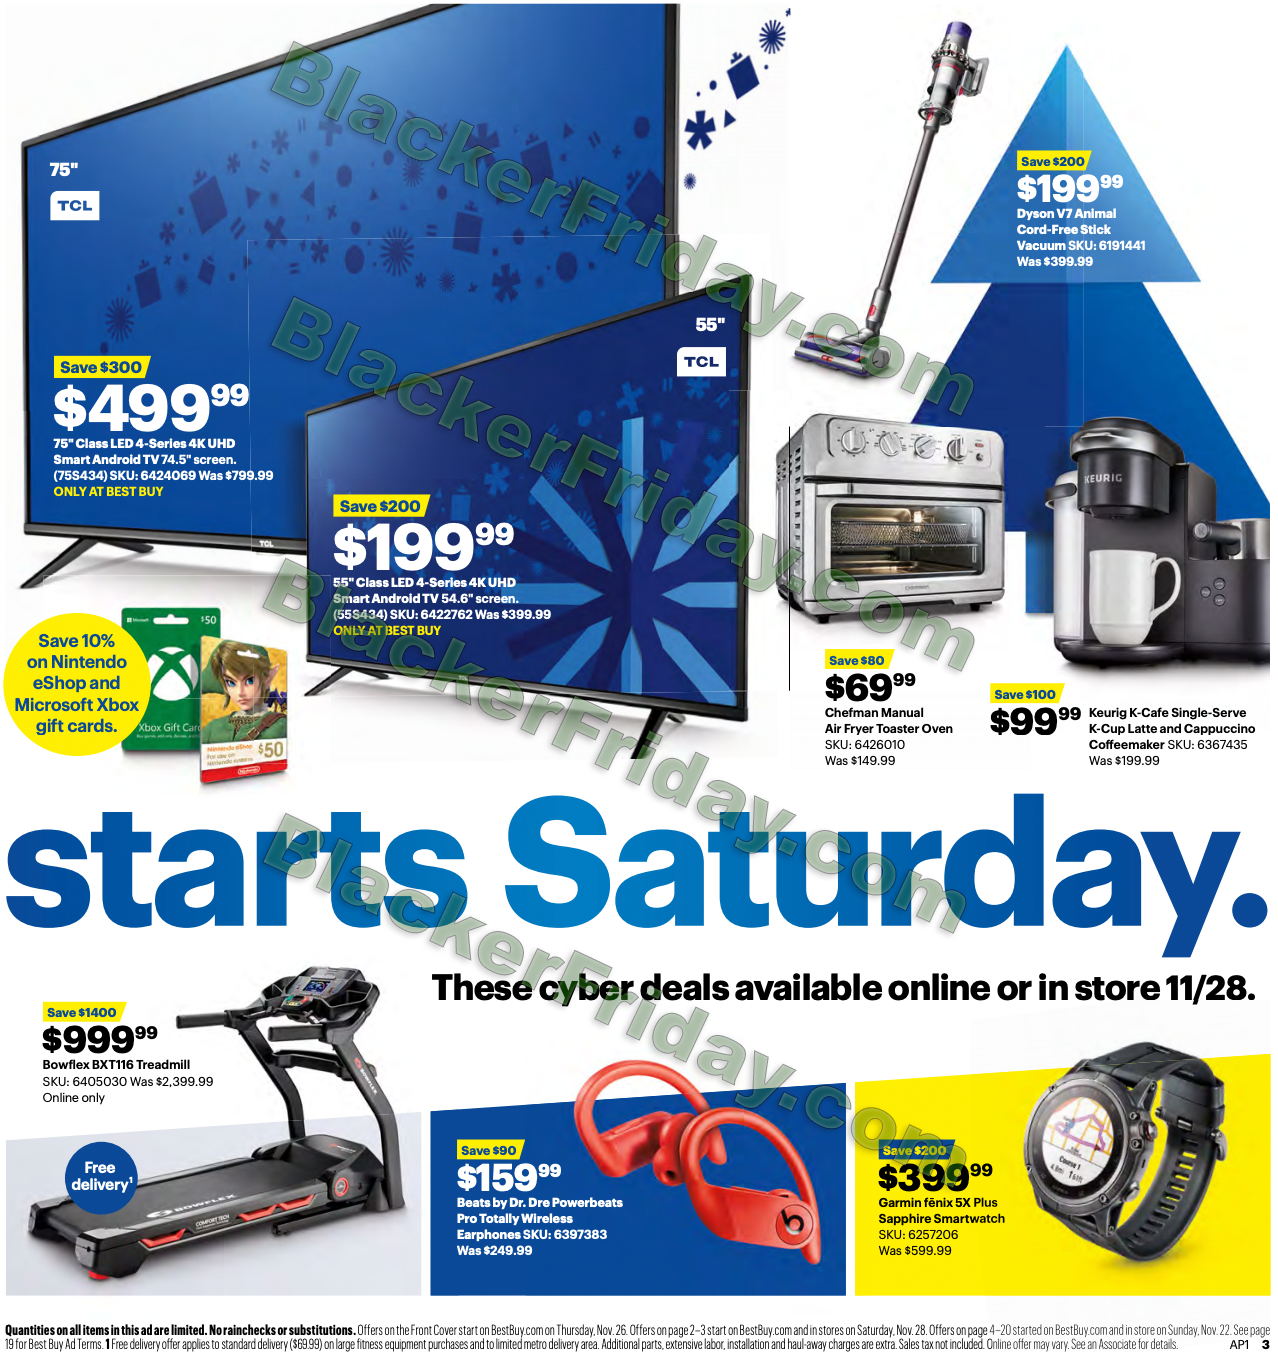 Best Buy Black Friday 2021 Sale - What to Expect in The Ad - Blacker Friday - What Kind Of Sales Can I Expect On Black Friday